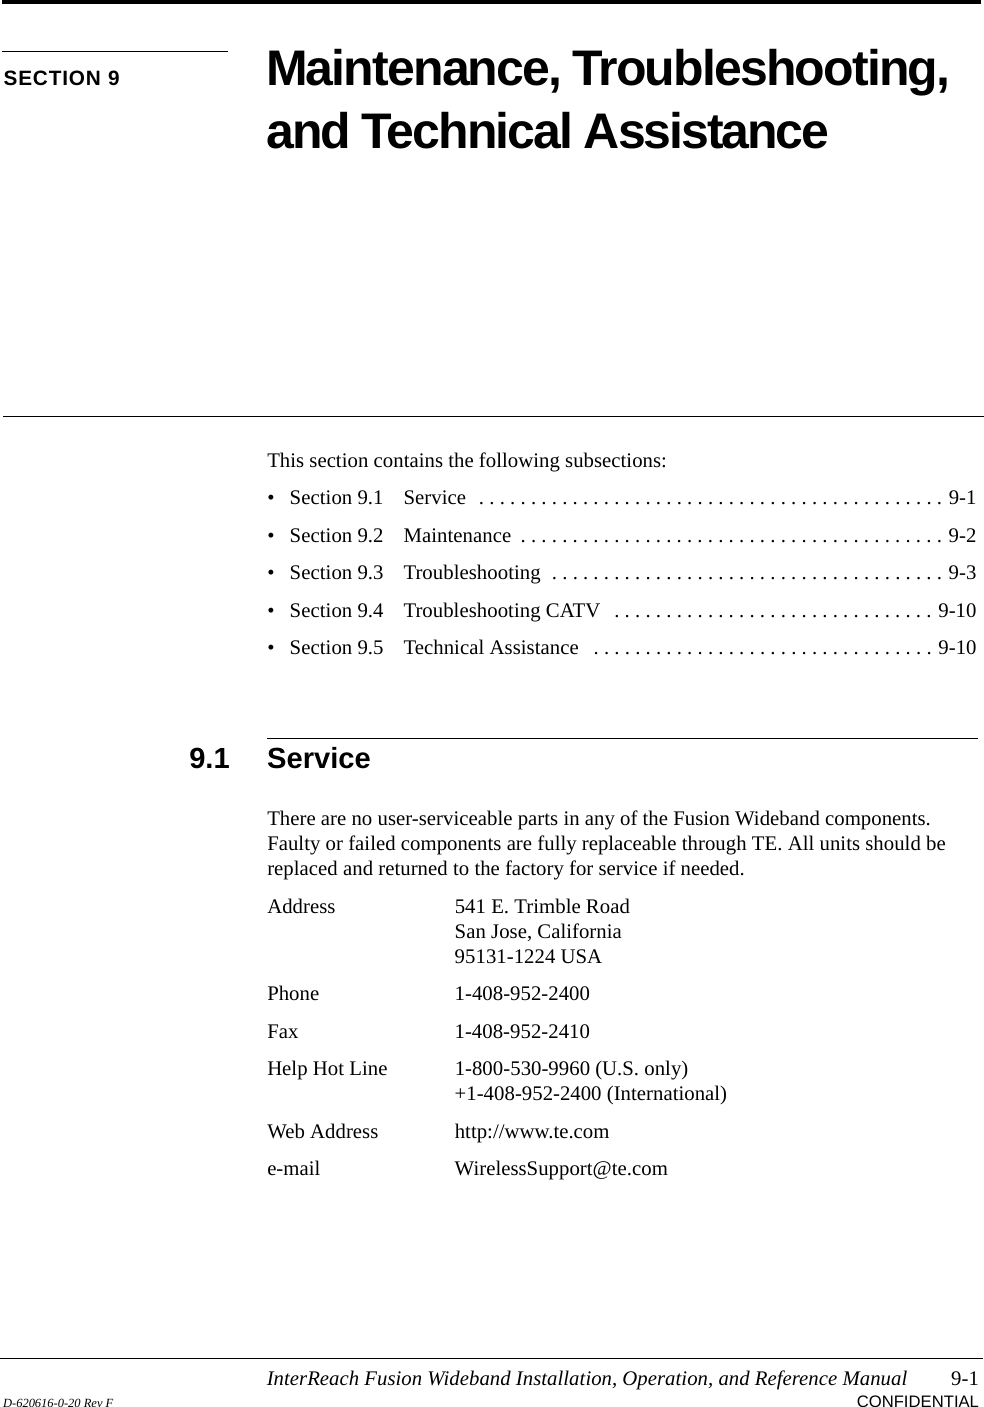 InterReach Fusion Wideband Installation, Operation, and Reference Manual 9-1D-620616-0-20 Rev F CONFIDENTIALSECTION 9 Maintenance, Troubleshooting, and Technical AssistanceThis section contains the following subsections:• Section 9.1   Service  . . . . . . . . . . . . . . . . . . . . . . . . . . . . . . . . . . . . . . . . . . . . . 9-1• Section 9.2   Maintenance  . . . . . . . . . . . . . . . . . . . . . . . . . . . . . . . . . . . . . . . . . 9-2• Section 9.3   Troubleshooting  . . . . . . . . . . . . . . . . . . . . . . . . . . . . . . . . . . . . . . 9-3• Section 9.4   Troubleshooting CATV   . . . . . . . . . . . . . . . . . . . . . . . . . . . . . . . 9-10• Section 9.5   Technical Assistance   . . . . . . . . . . . . . . . . . . . . . . . . . . . . . . . . . 9-109.1 ServiceThere are no user-serviceable parts in any of the Fusion Wideband components. Faulty or failed components are fully replaceable through TE. All units should be replaced and returned to the factory for service if needed.Address 541 E. Trimble RoadSan Jose, California95131-1224 USAPhone 1-408-952-2400Fax 1-408-952-2410Help Hot Line 1-800-530-9960 (U.S. only)+1-408-952-2400 (International)Web Address http://www.te.come-mail WirelessSupport@te.com